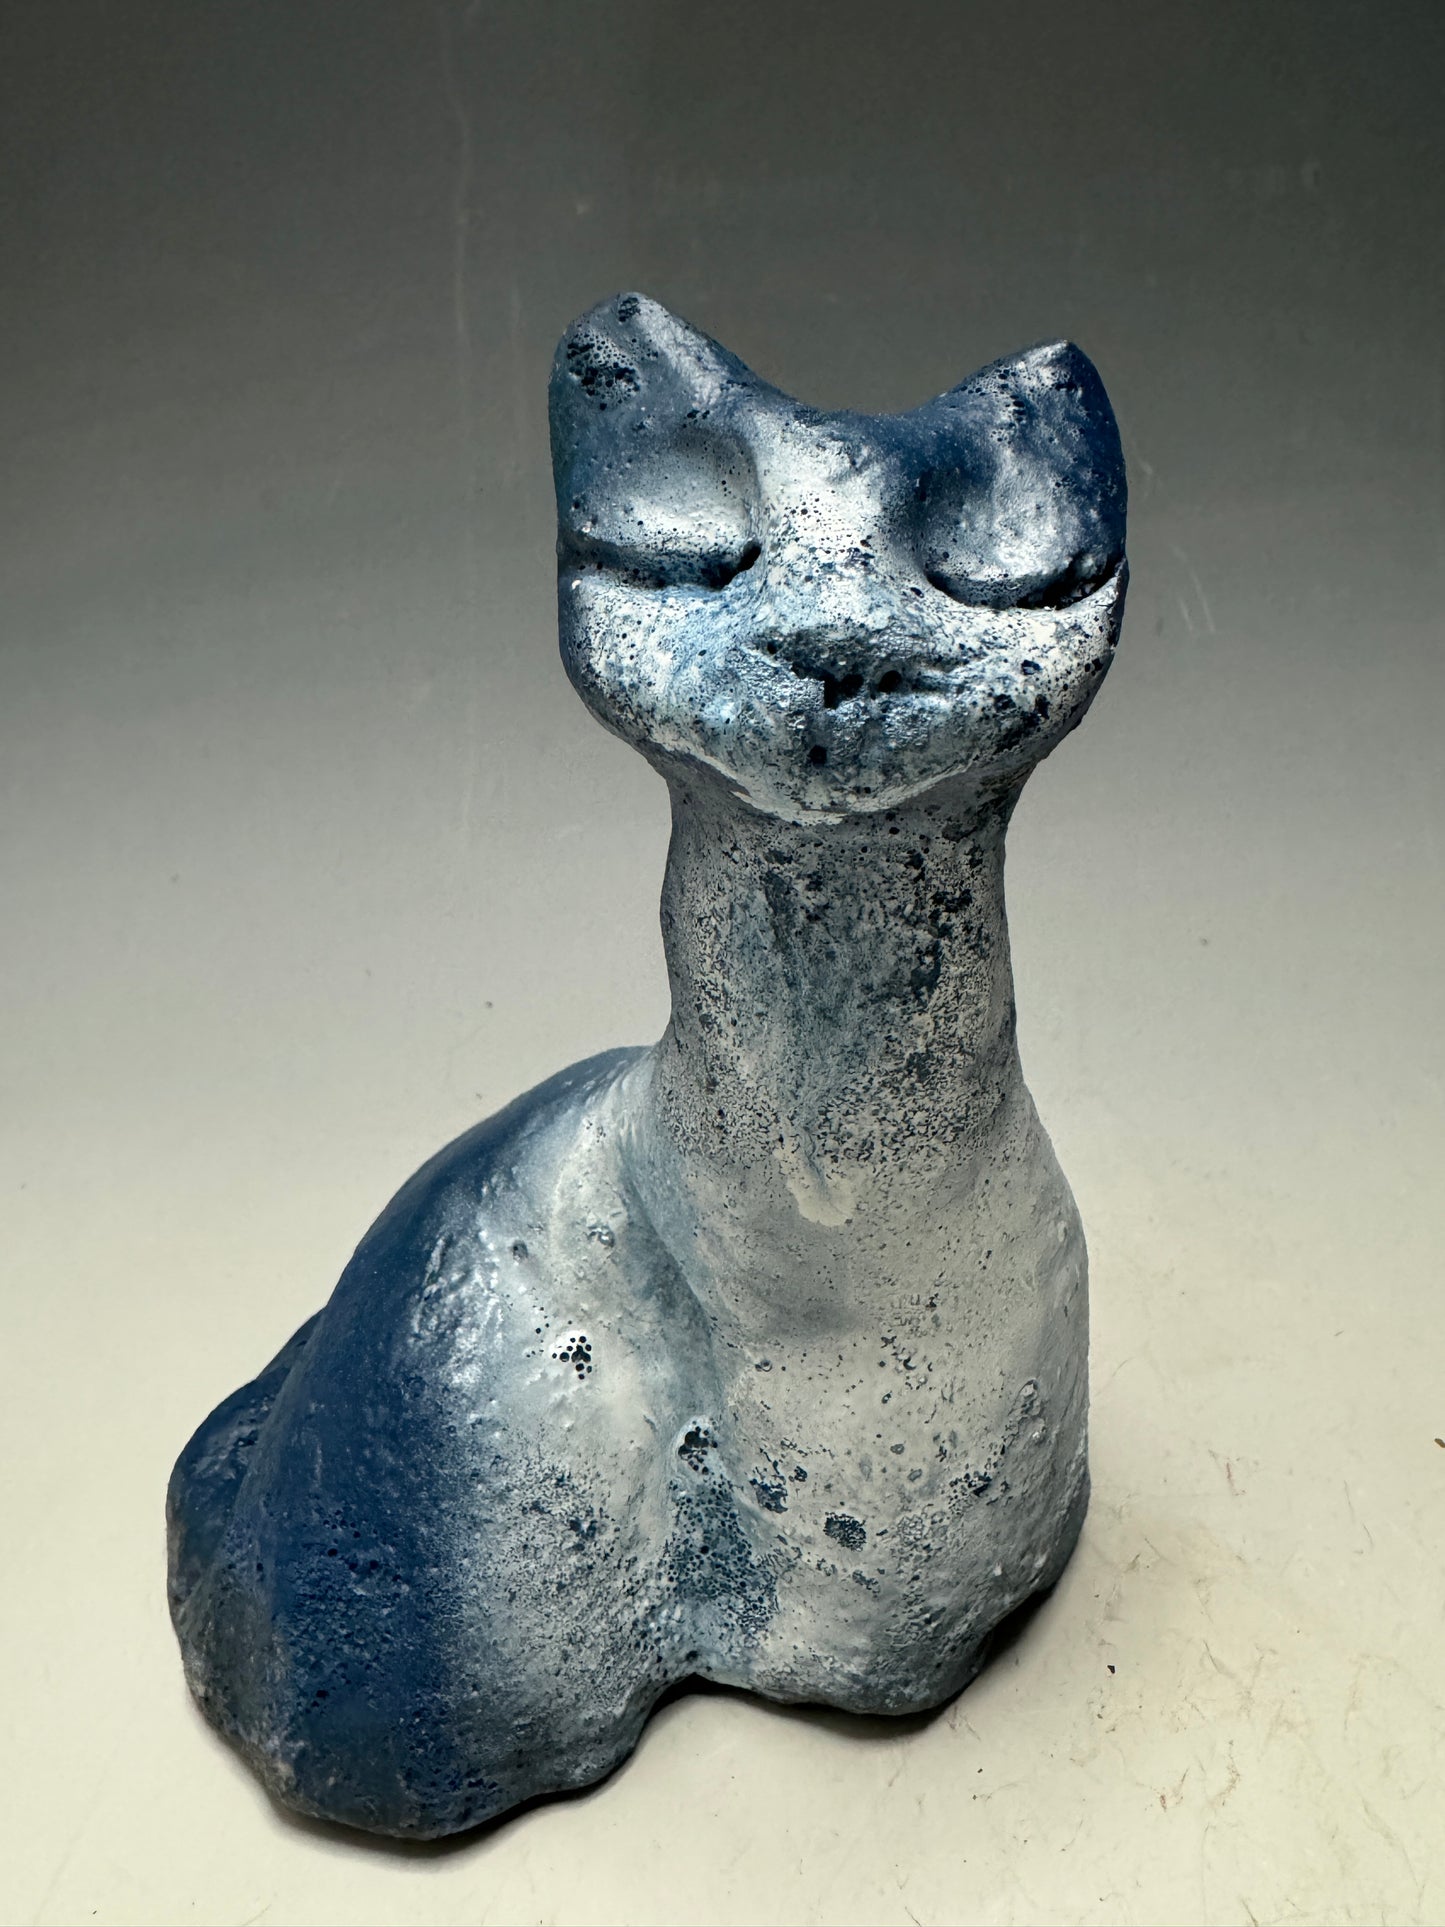 Welcome HK-10: 6.5' x 4" x 6" of exquisite embrace! Offer your beloved a remarkable mouser mate, featherweight at only 1.5 lbs, mesmerizingly-hued in sky blue fur. Fling your dwelling with delight as she radiates a beaming grin. Prepare to be delighted by this remarkable feline friend!